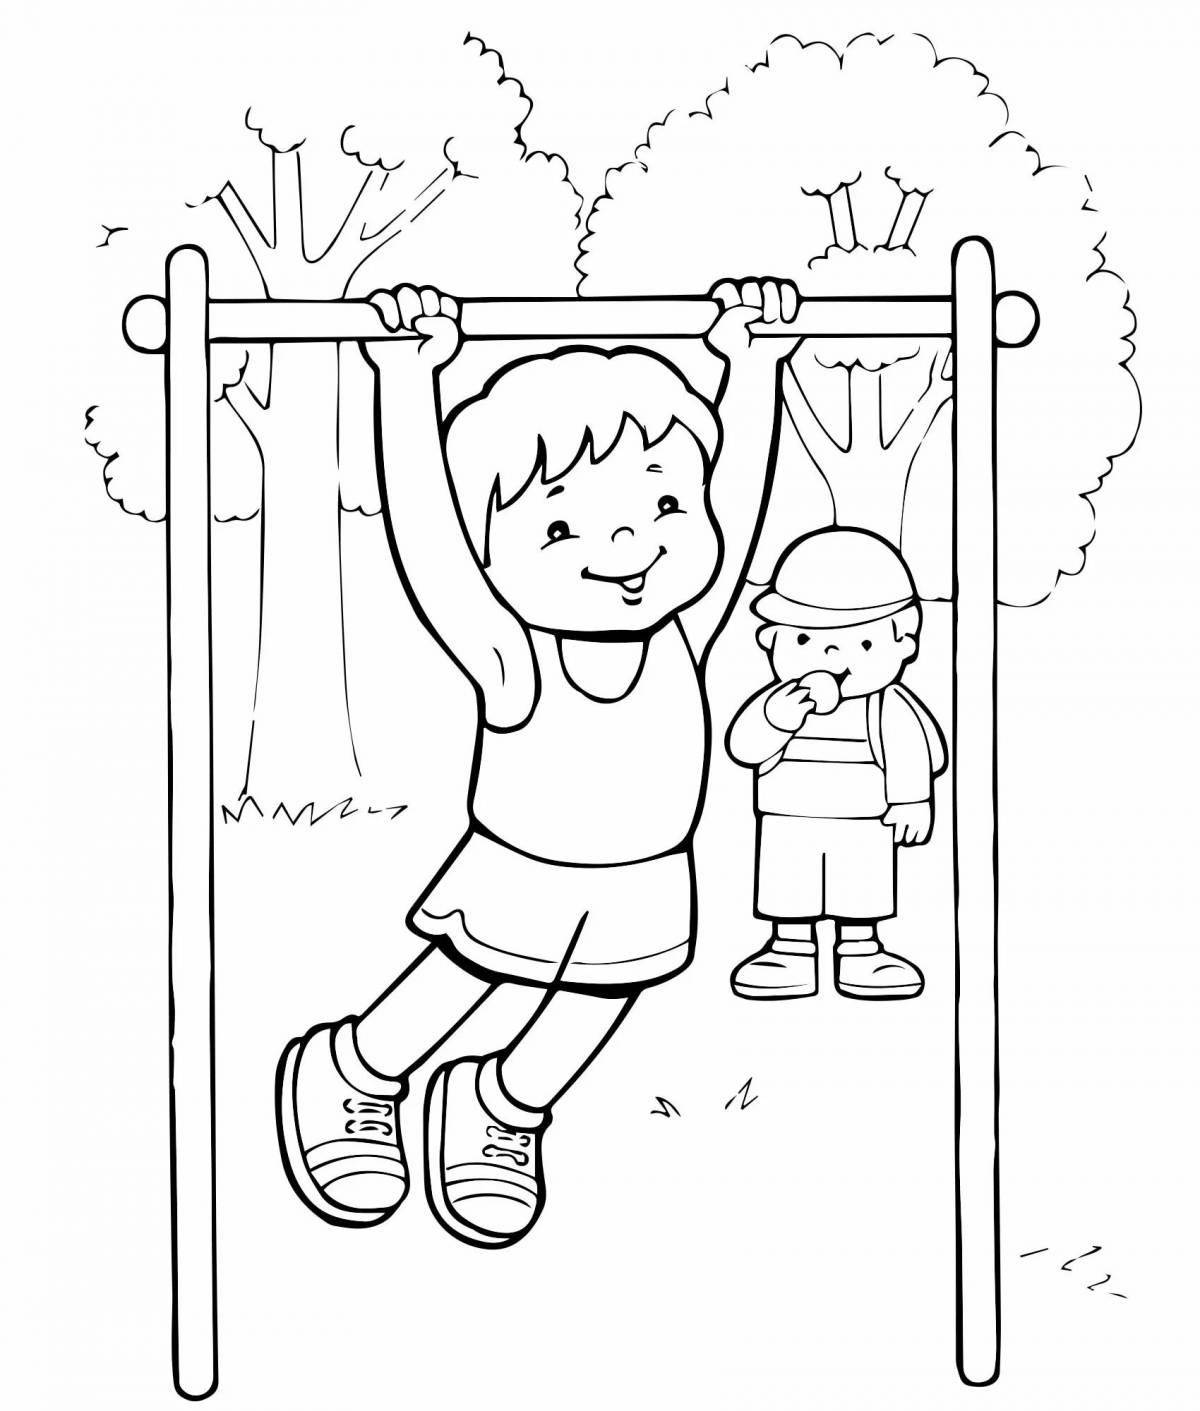 Playful healthy snack coloring page